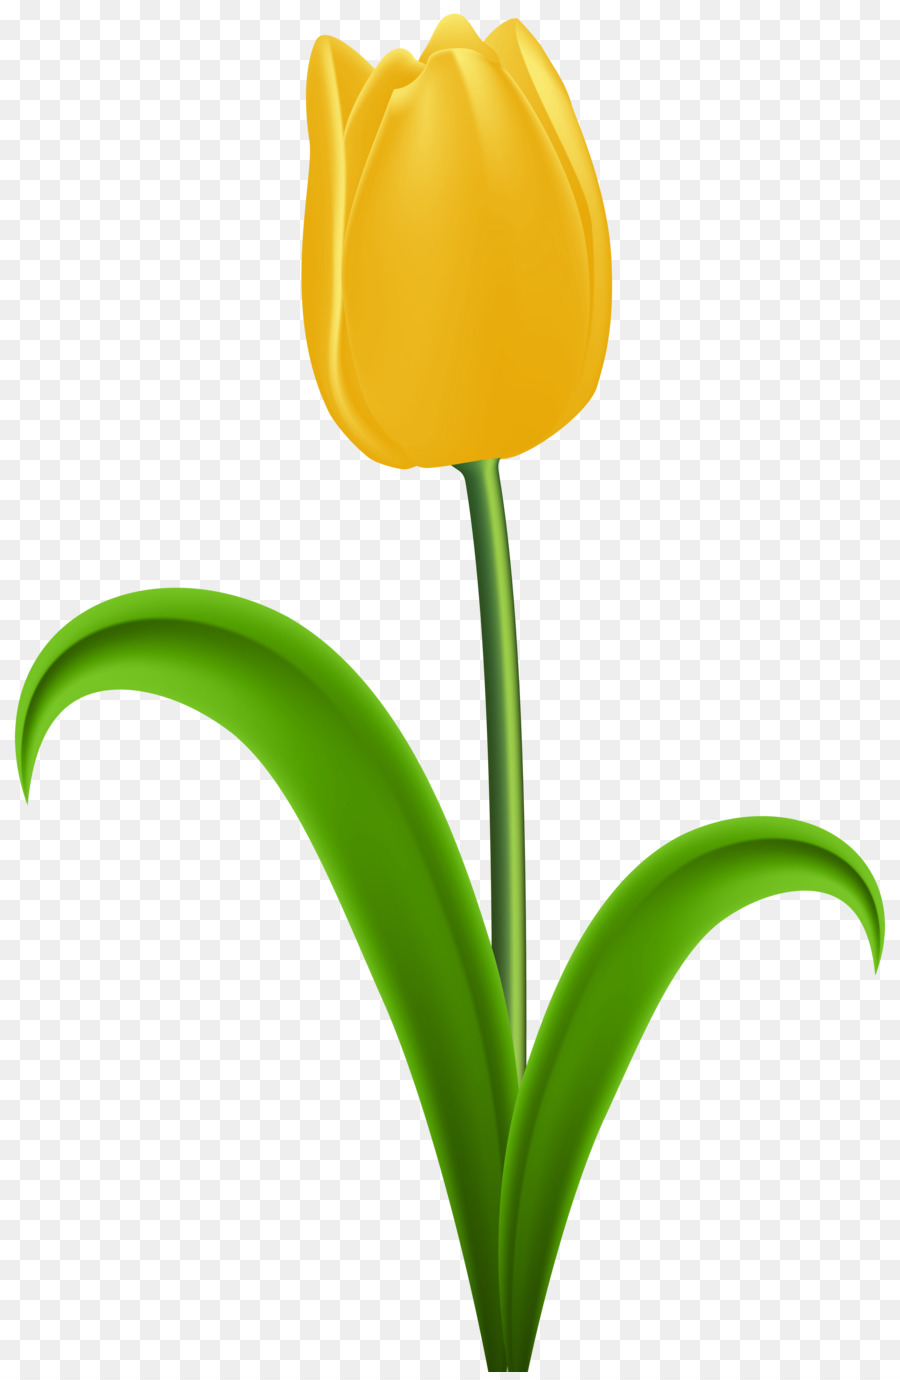 Free Transparent Tulips, Download Free Transparent Tulips png images ...